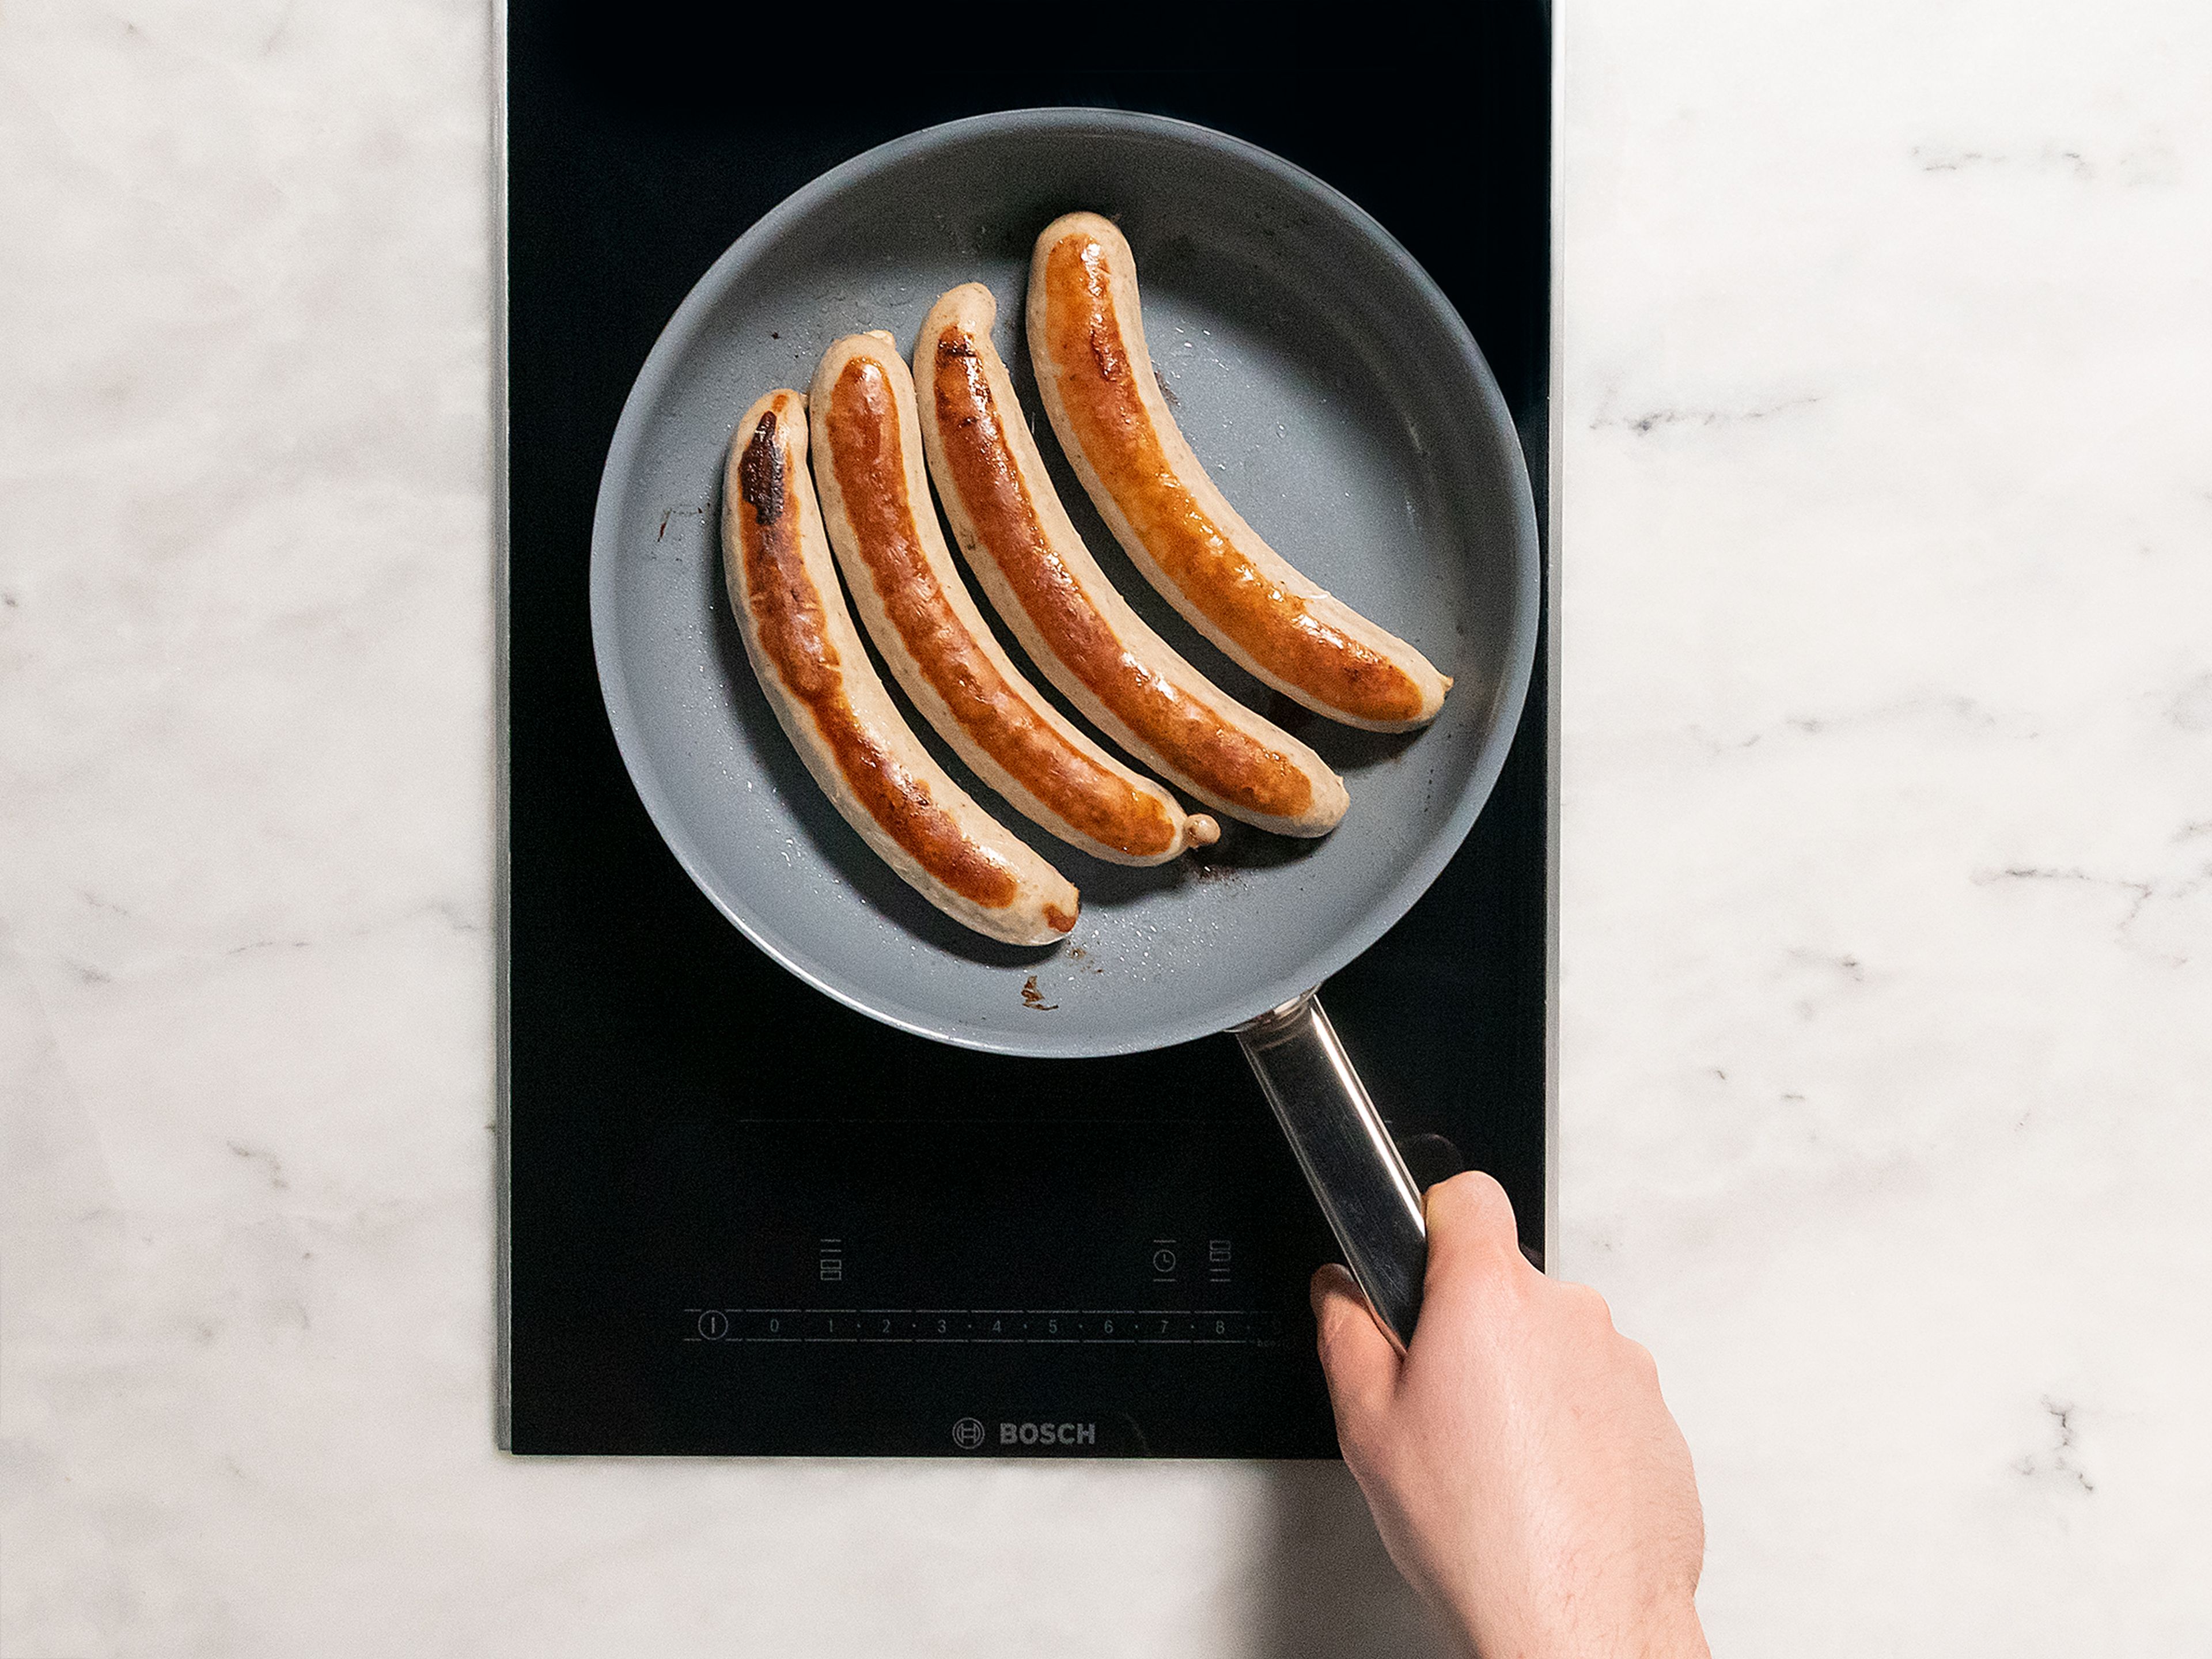 Add a generous amount of vegetable oil to a frying pan. Add sausages and fry until they are golden brown on all sides. Cut sausages into smaller pieces and generously pour the sauce all over. Top with more curry powder. Enjoy!